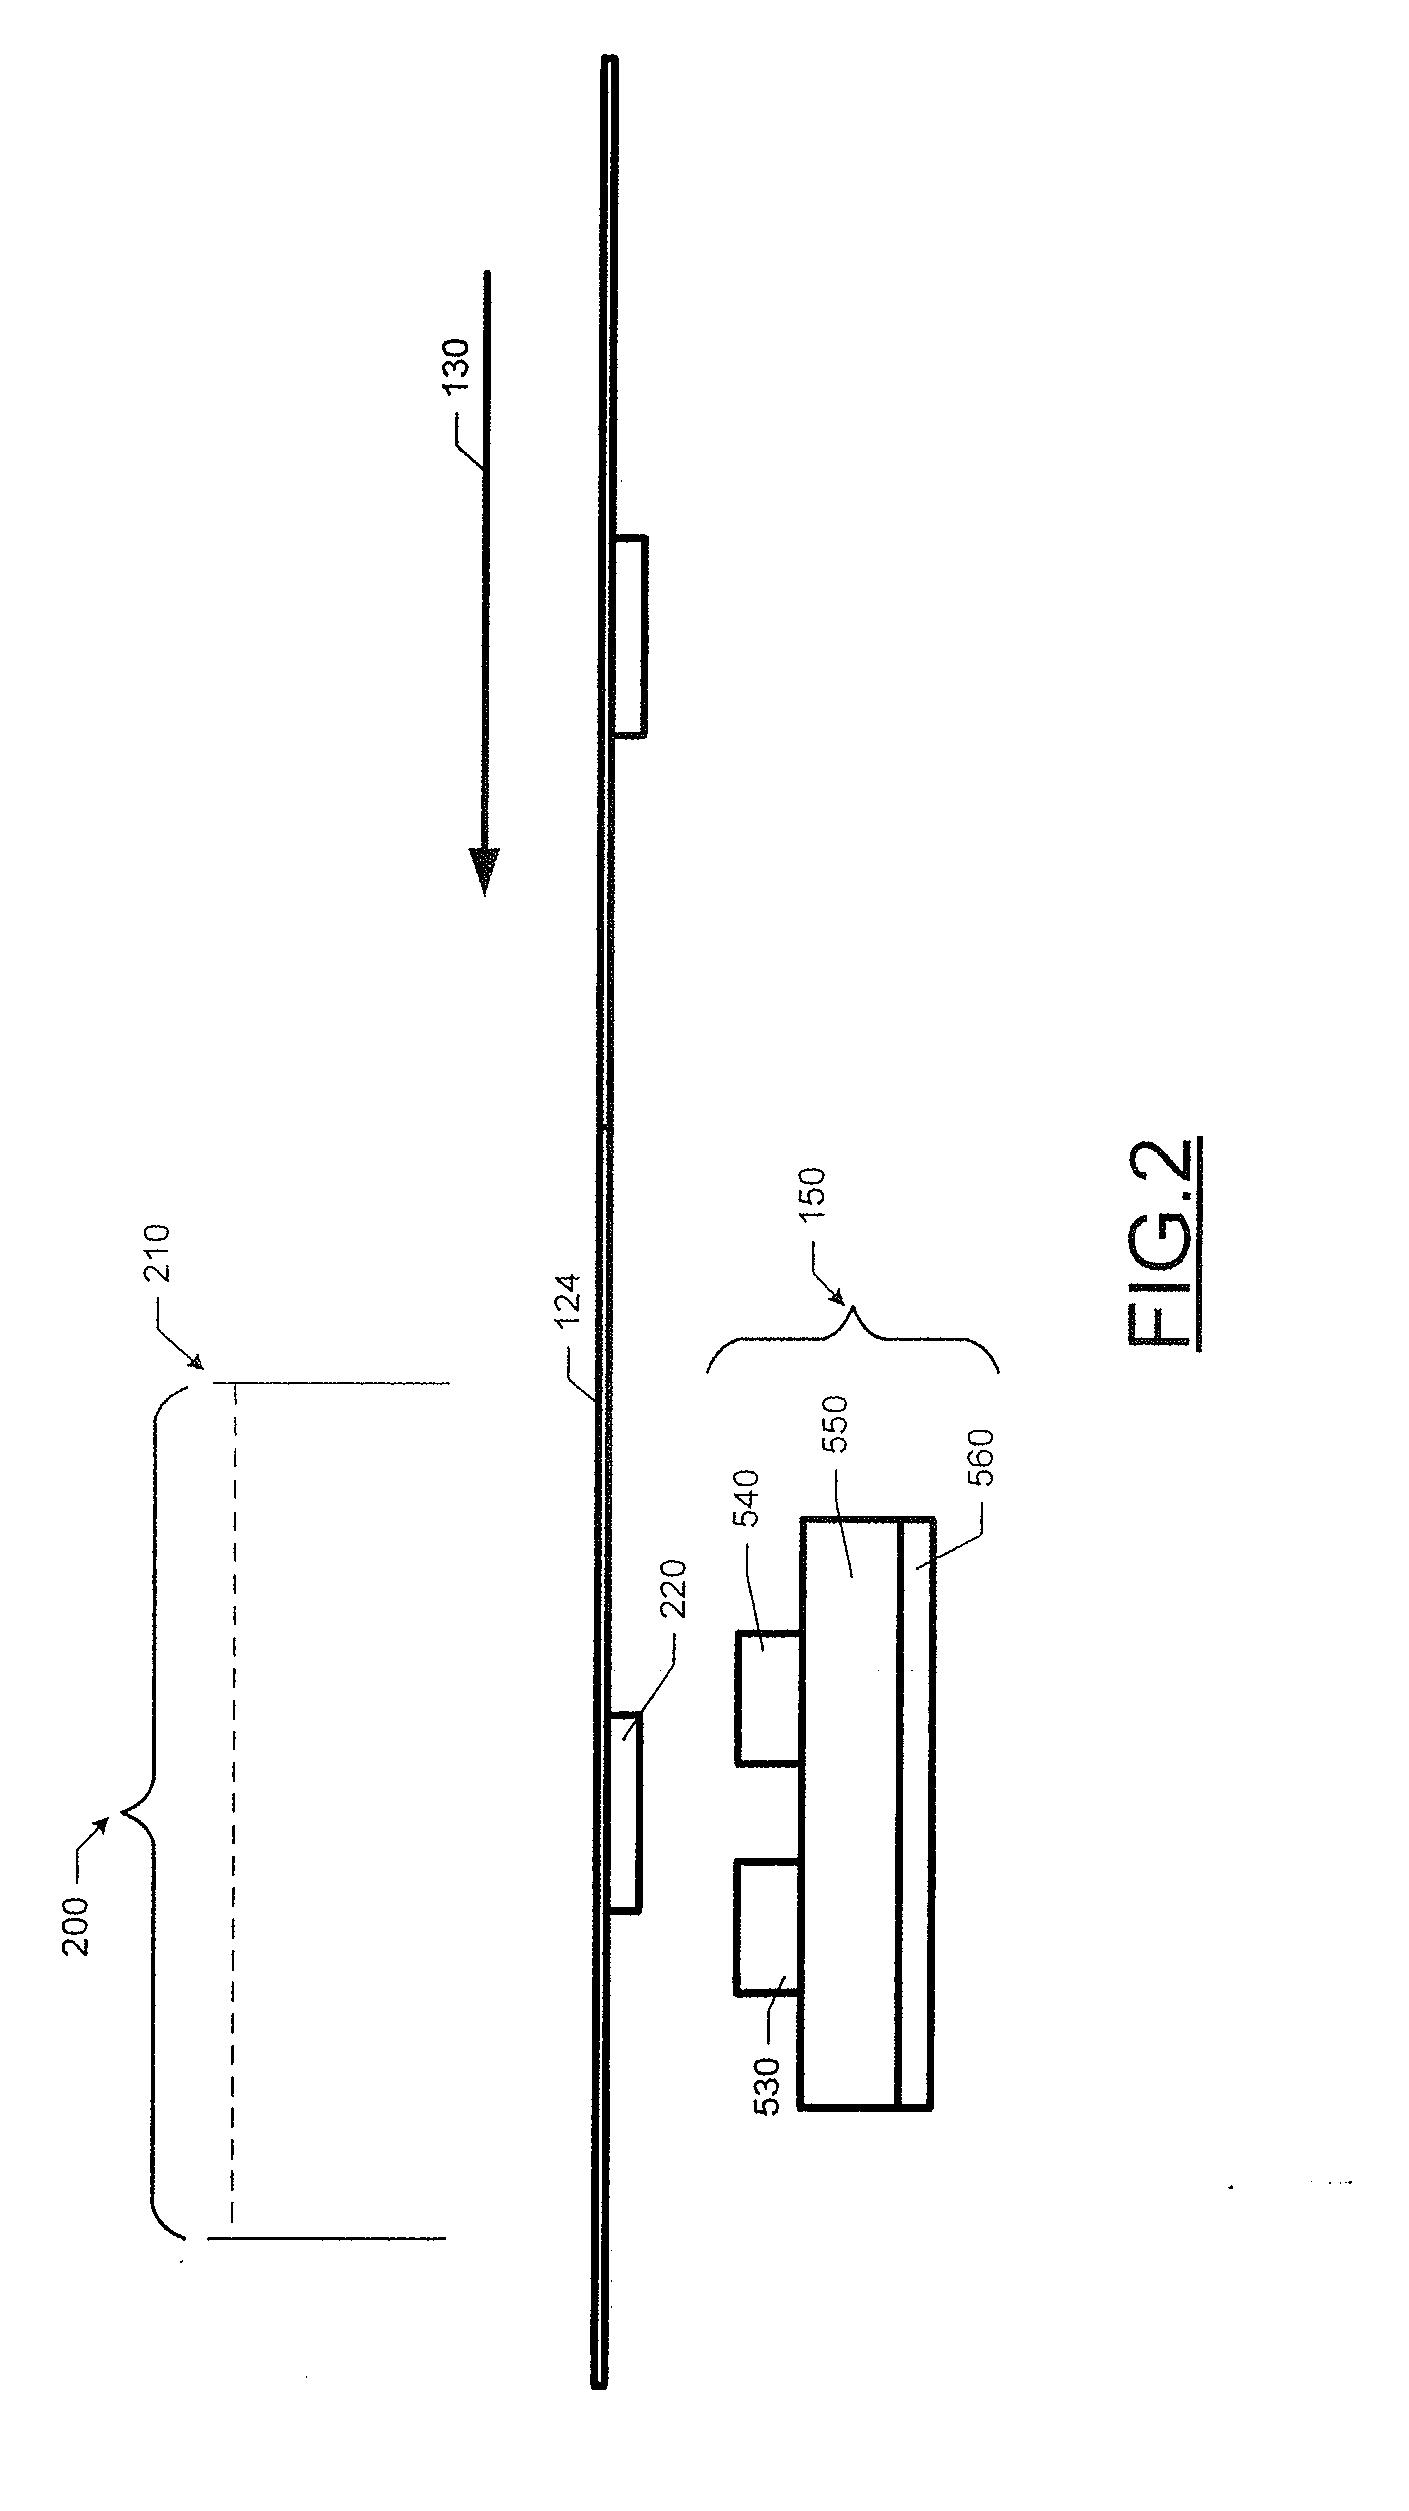 Near field coupling devices and associated systems and methods